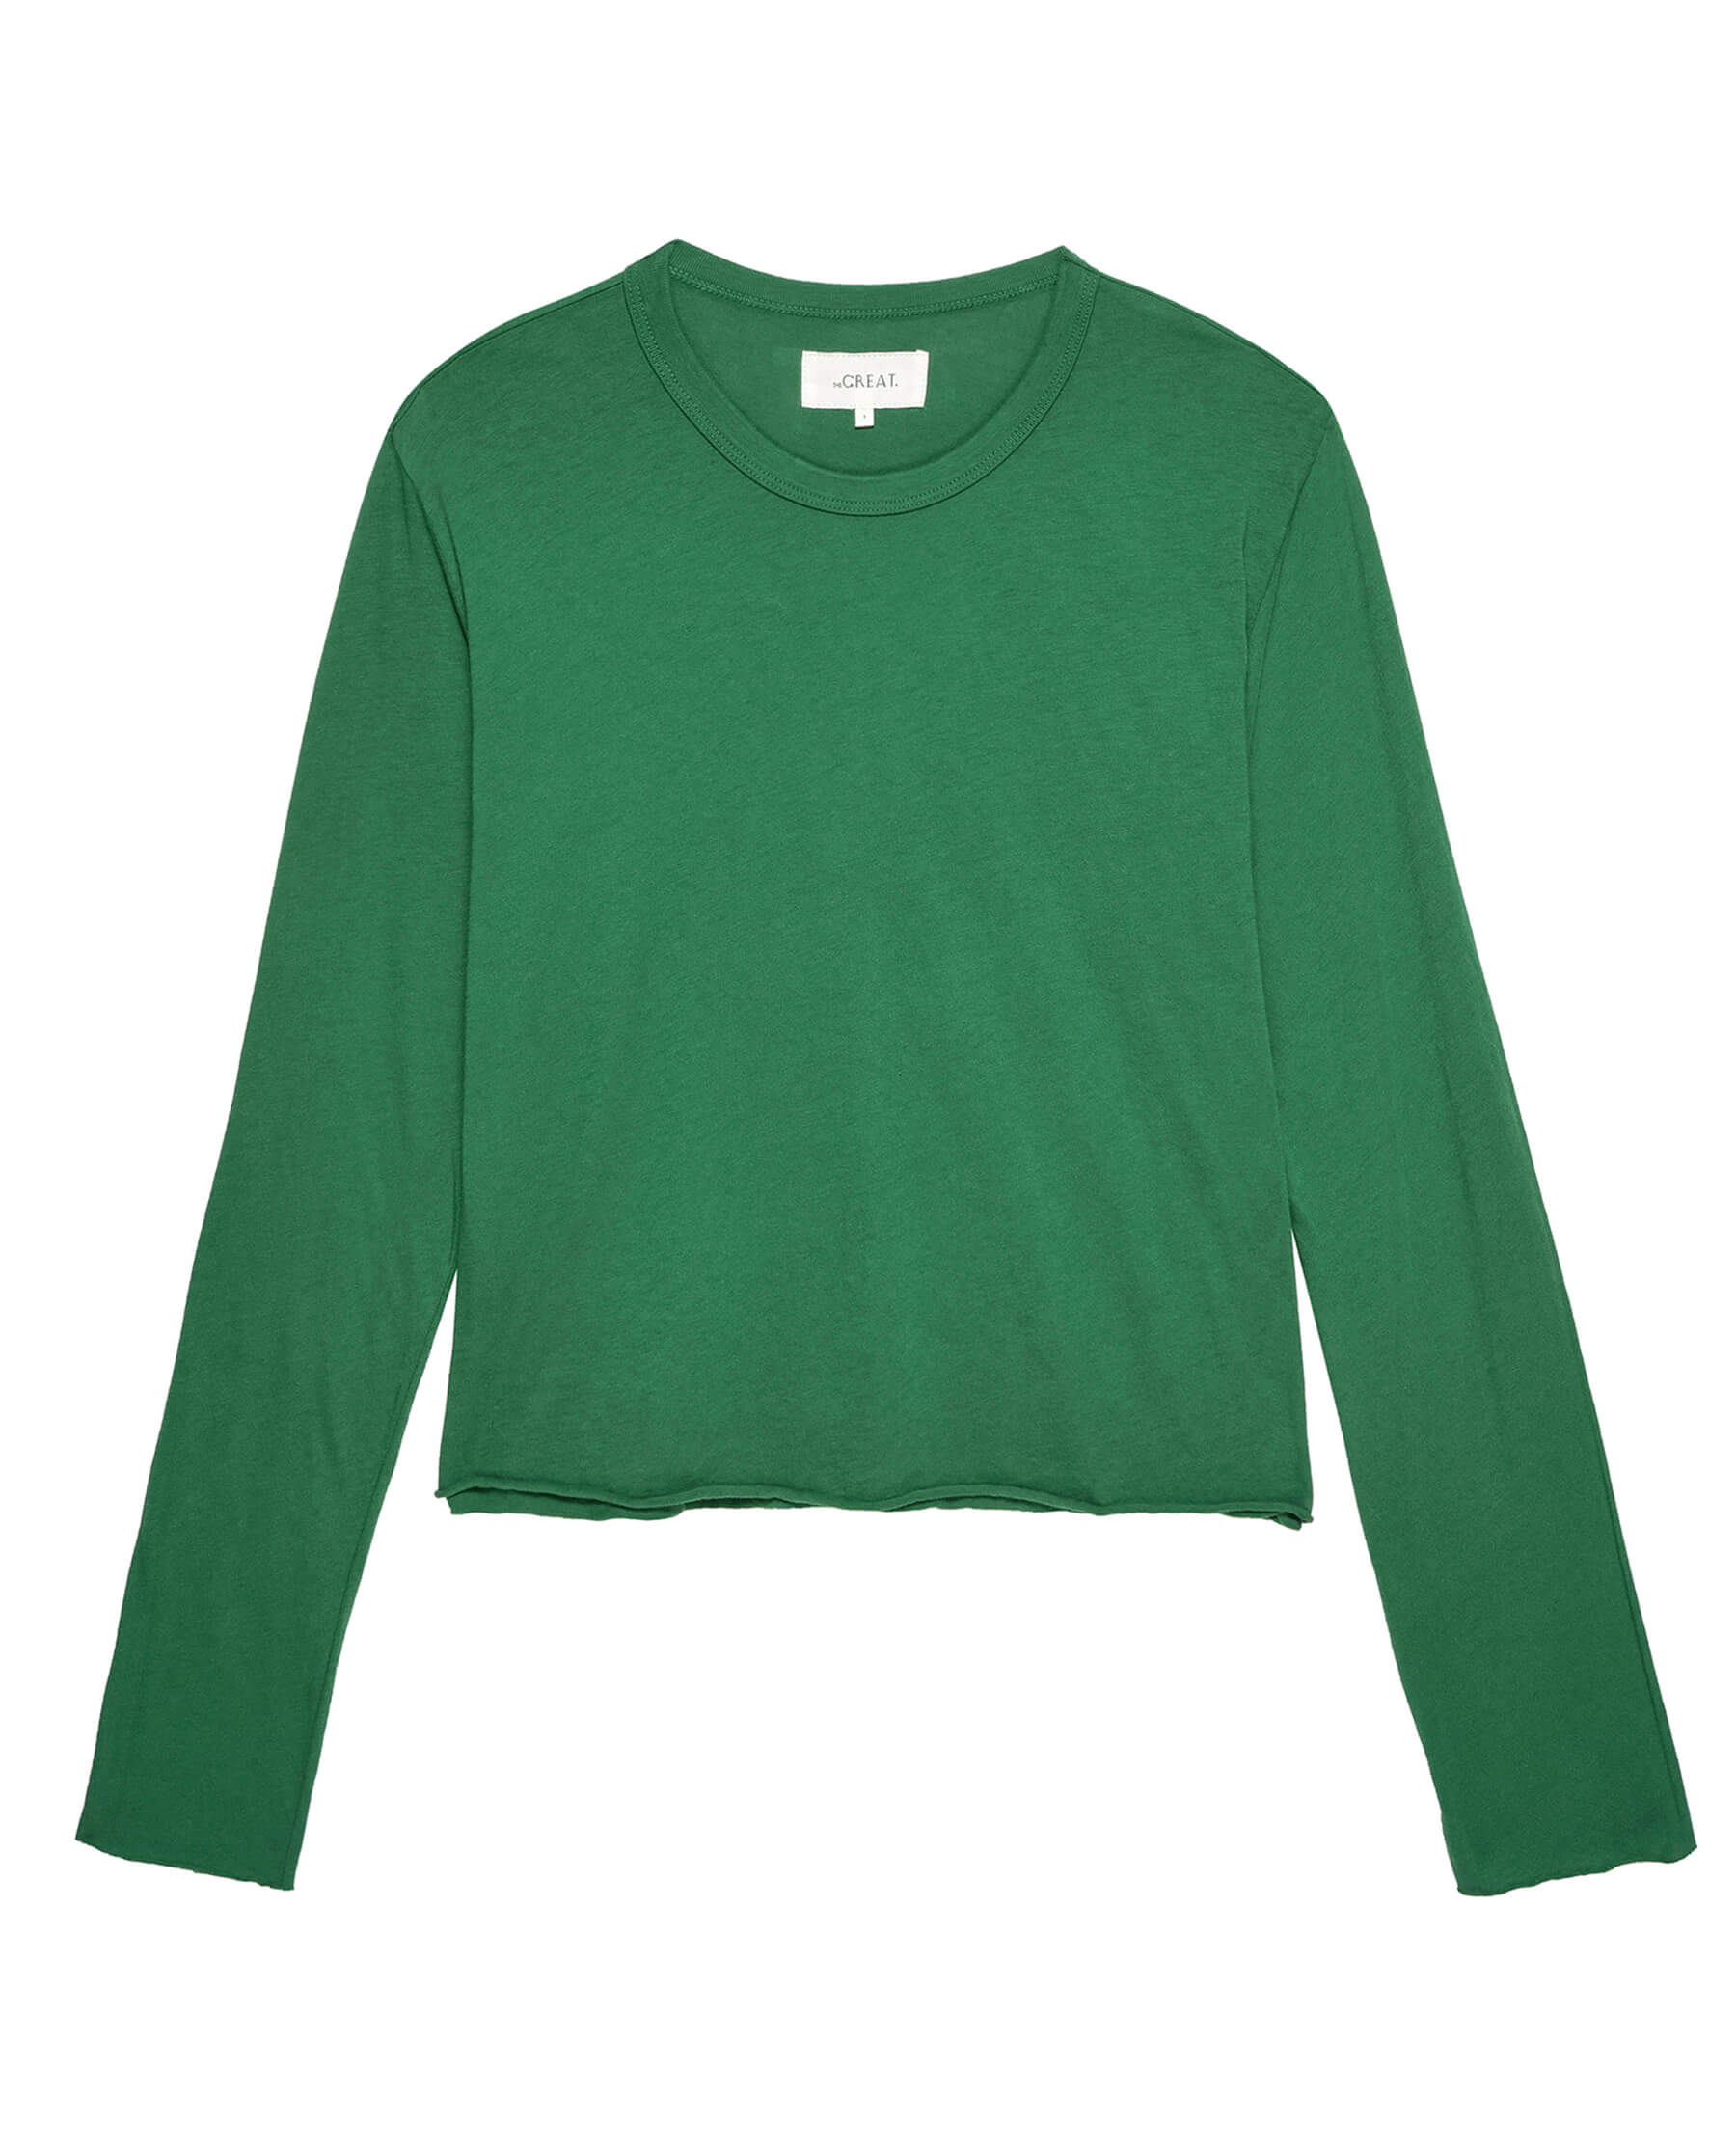 The Long Sleeve Crop Tee. Solid -- Holly Leaf TEES THE GREAT. HOL 23 KNITS